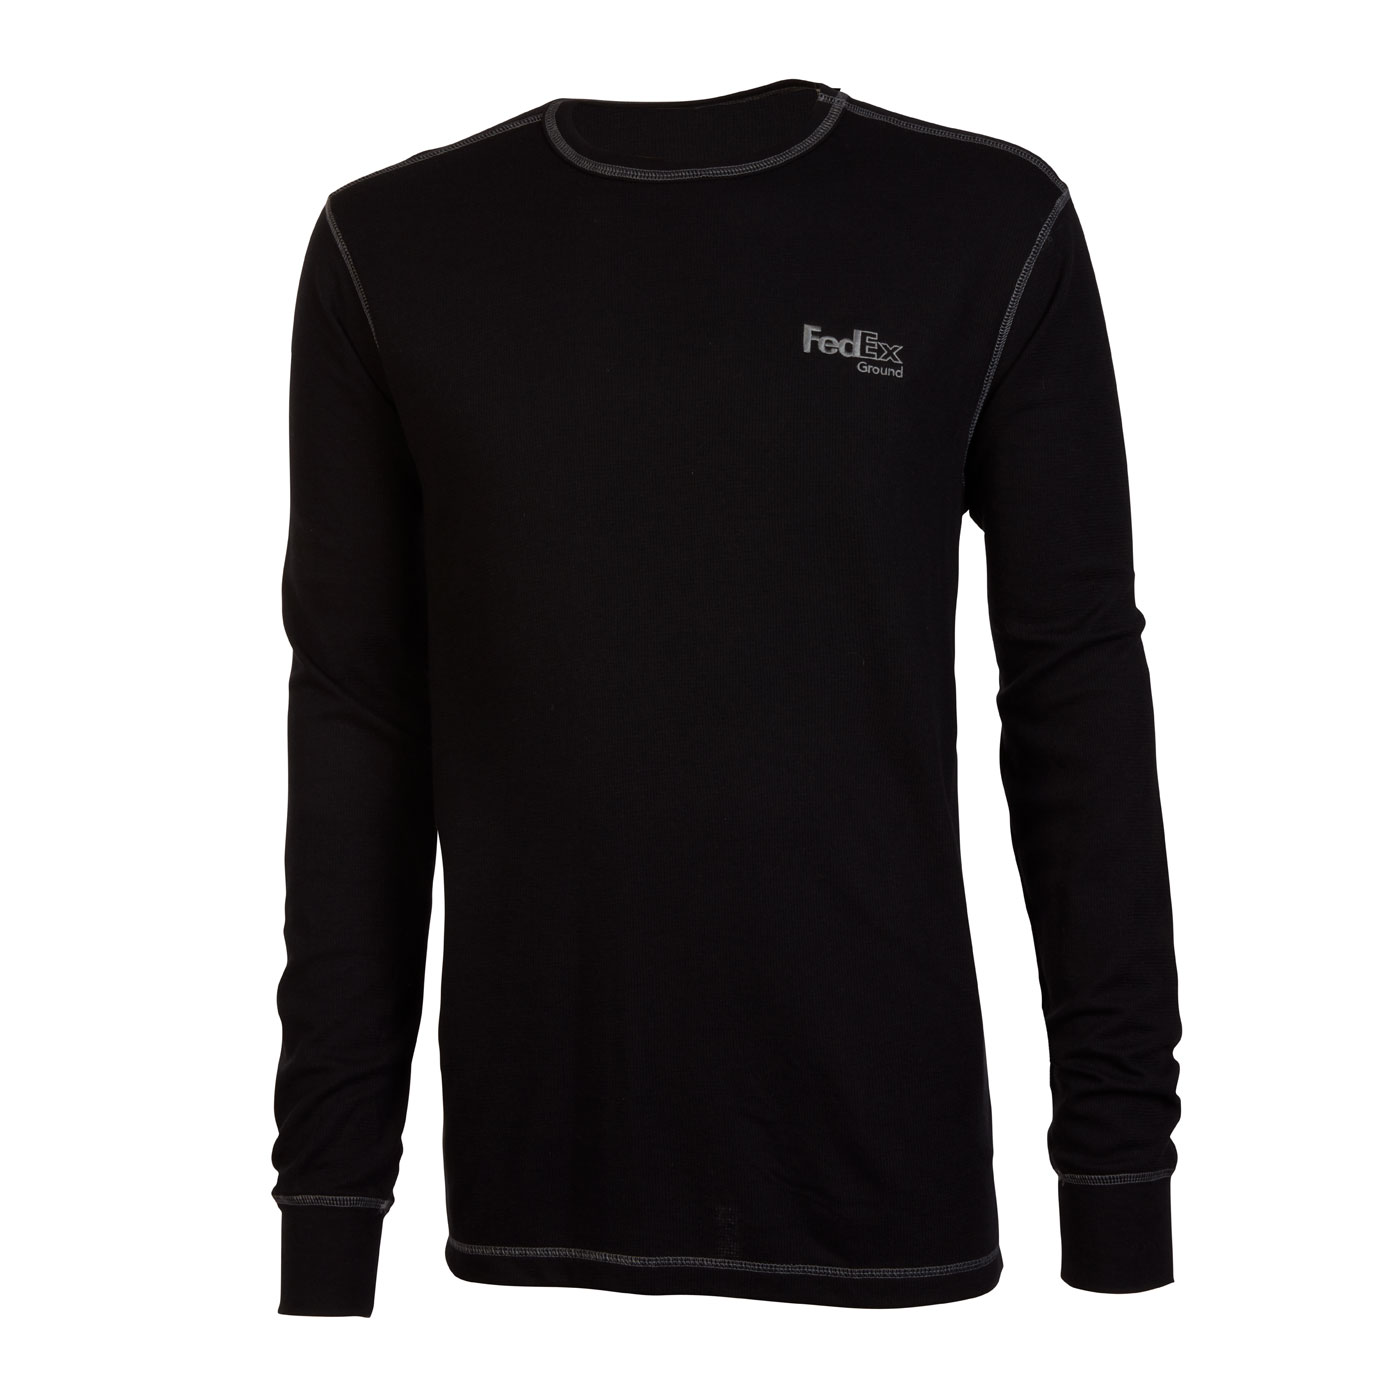 FedEx Ground Layering Thermal Long-Sleeve | The FedEx Company Store